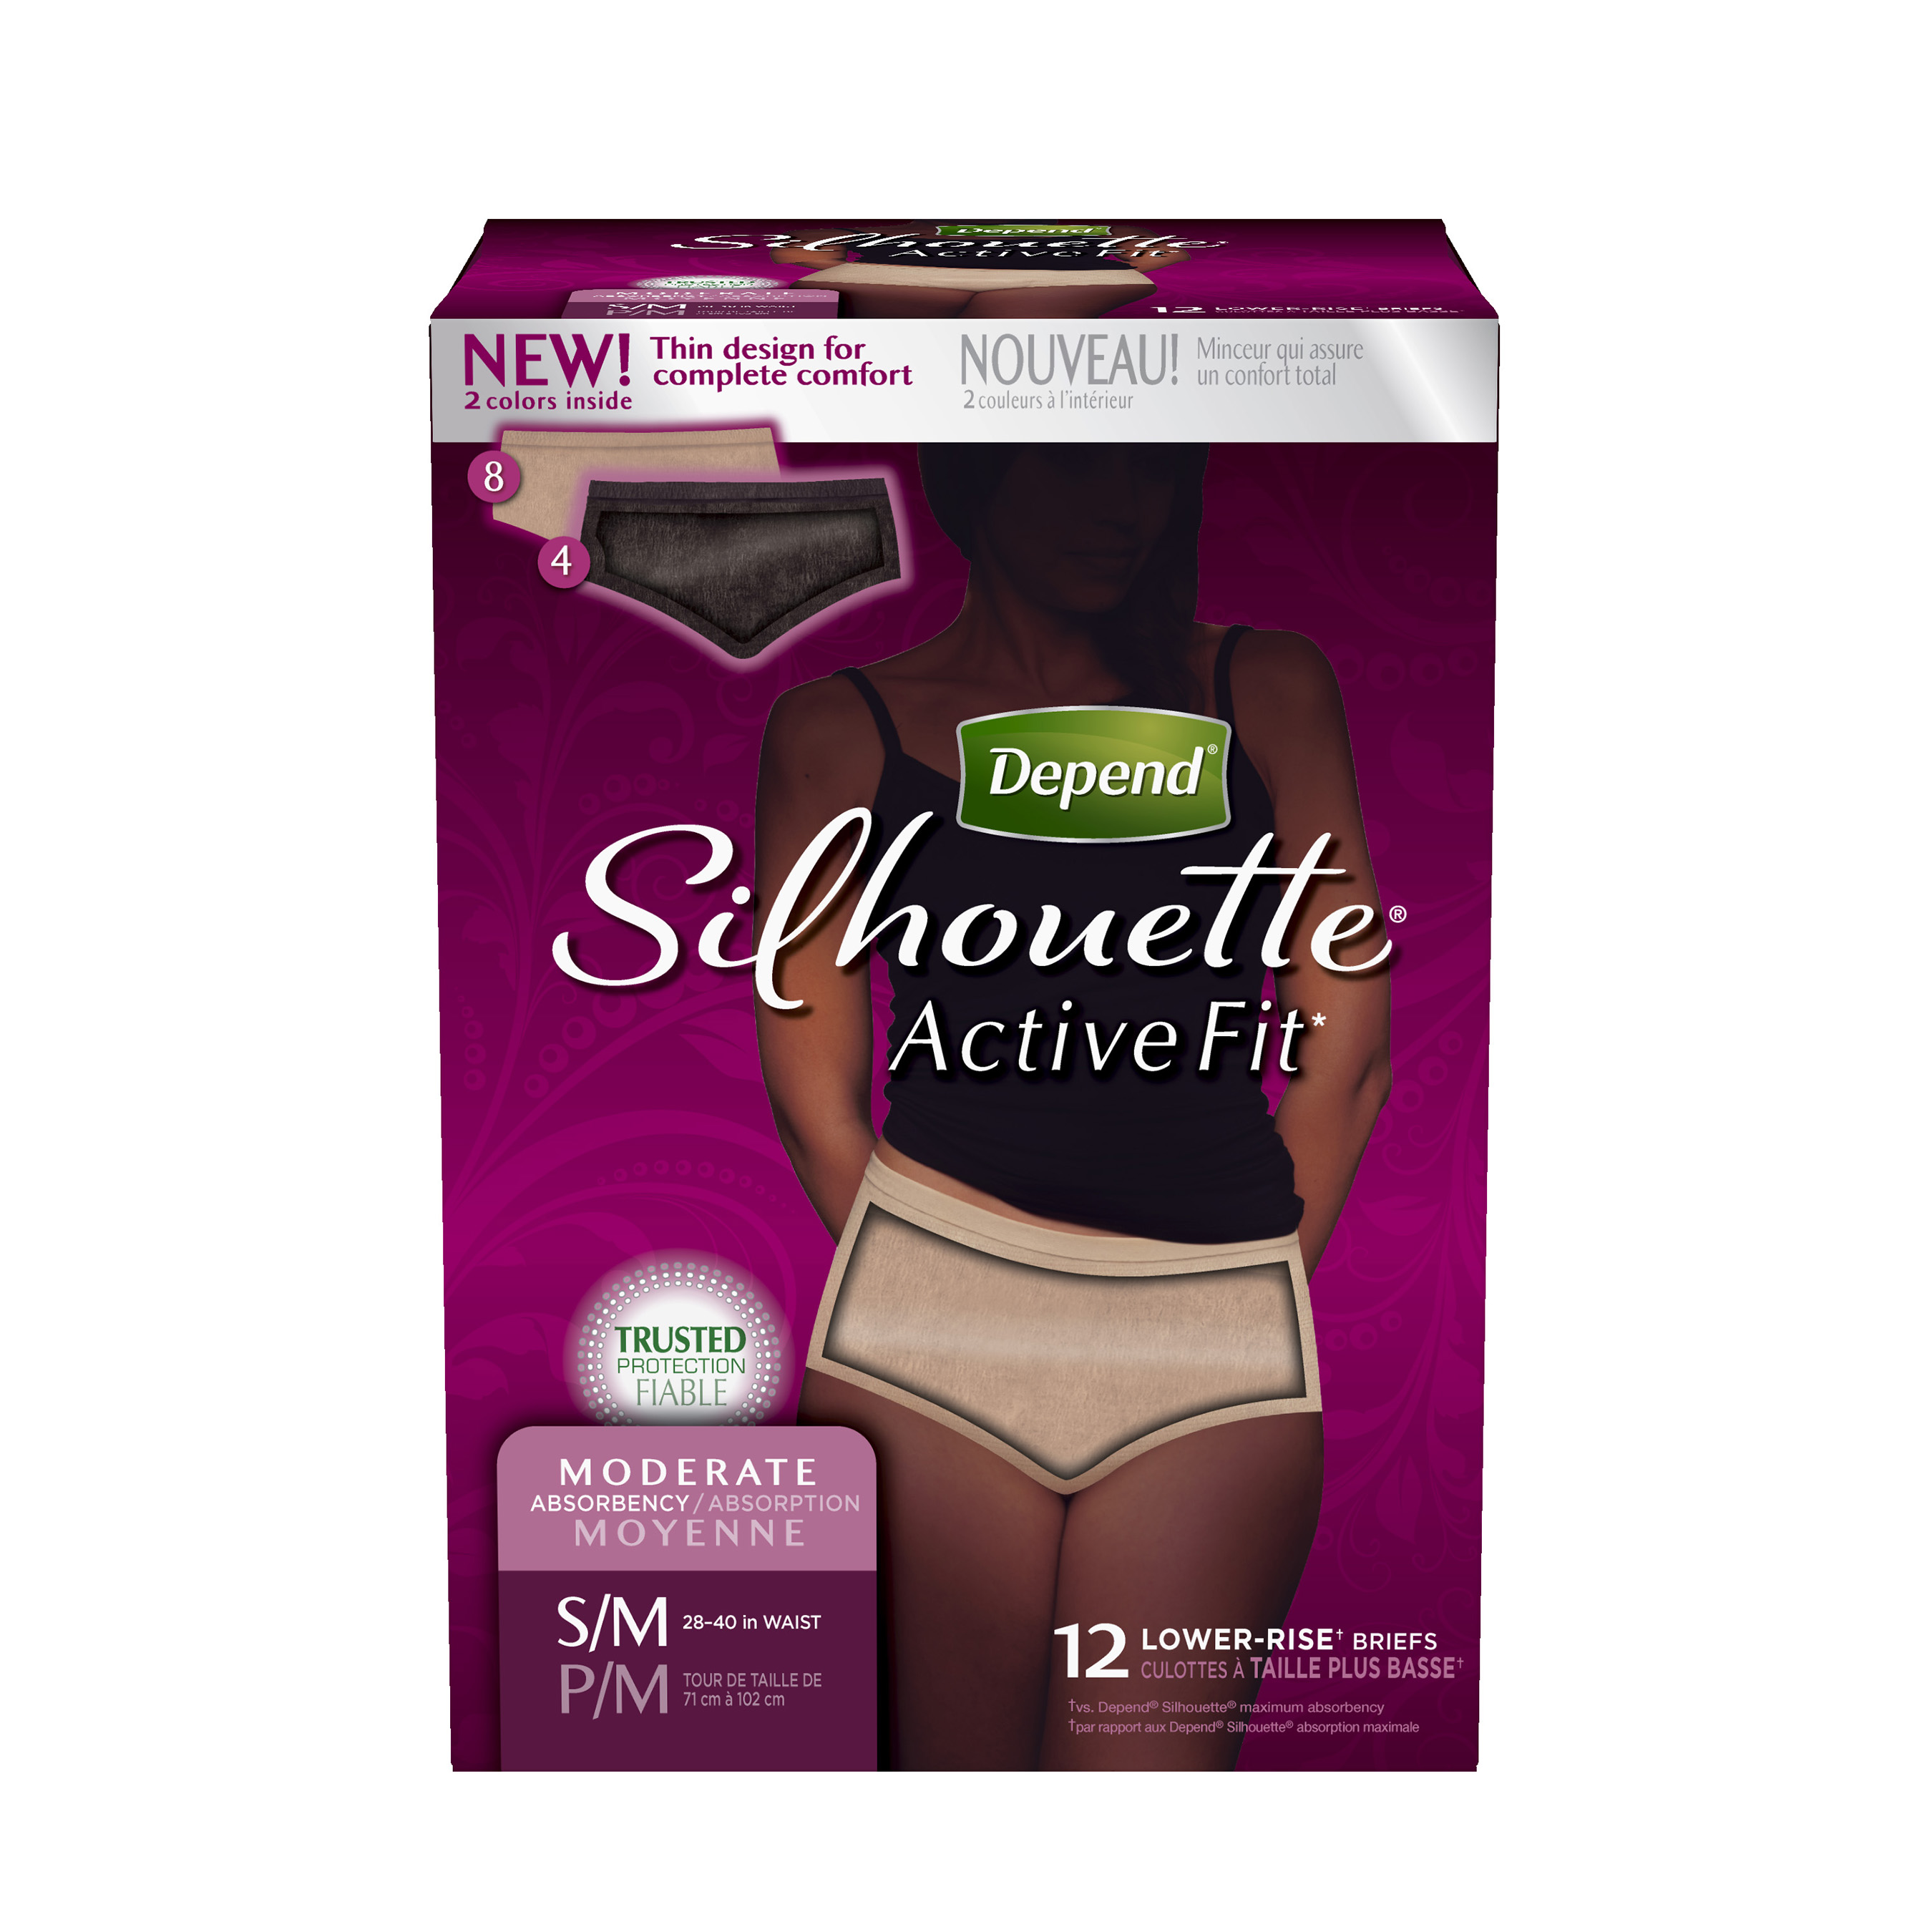 New Depend Silhouette Active Fit briefs feature a thin design for complete comfort; a lower rise for an underwear-like look, fit and feel; and come in beige and black colors.